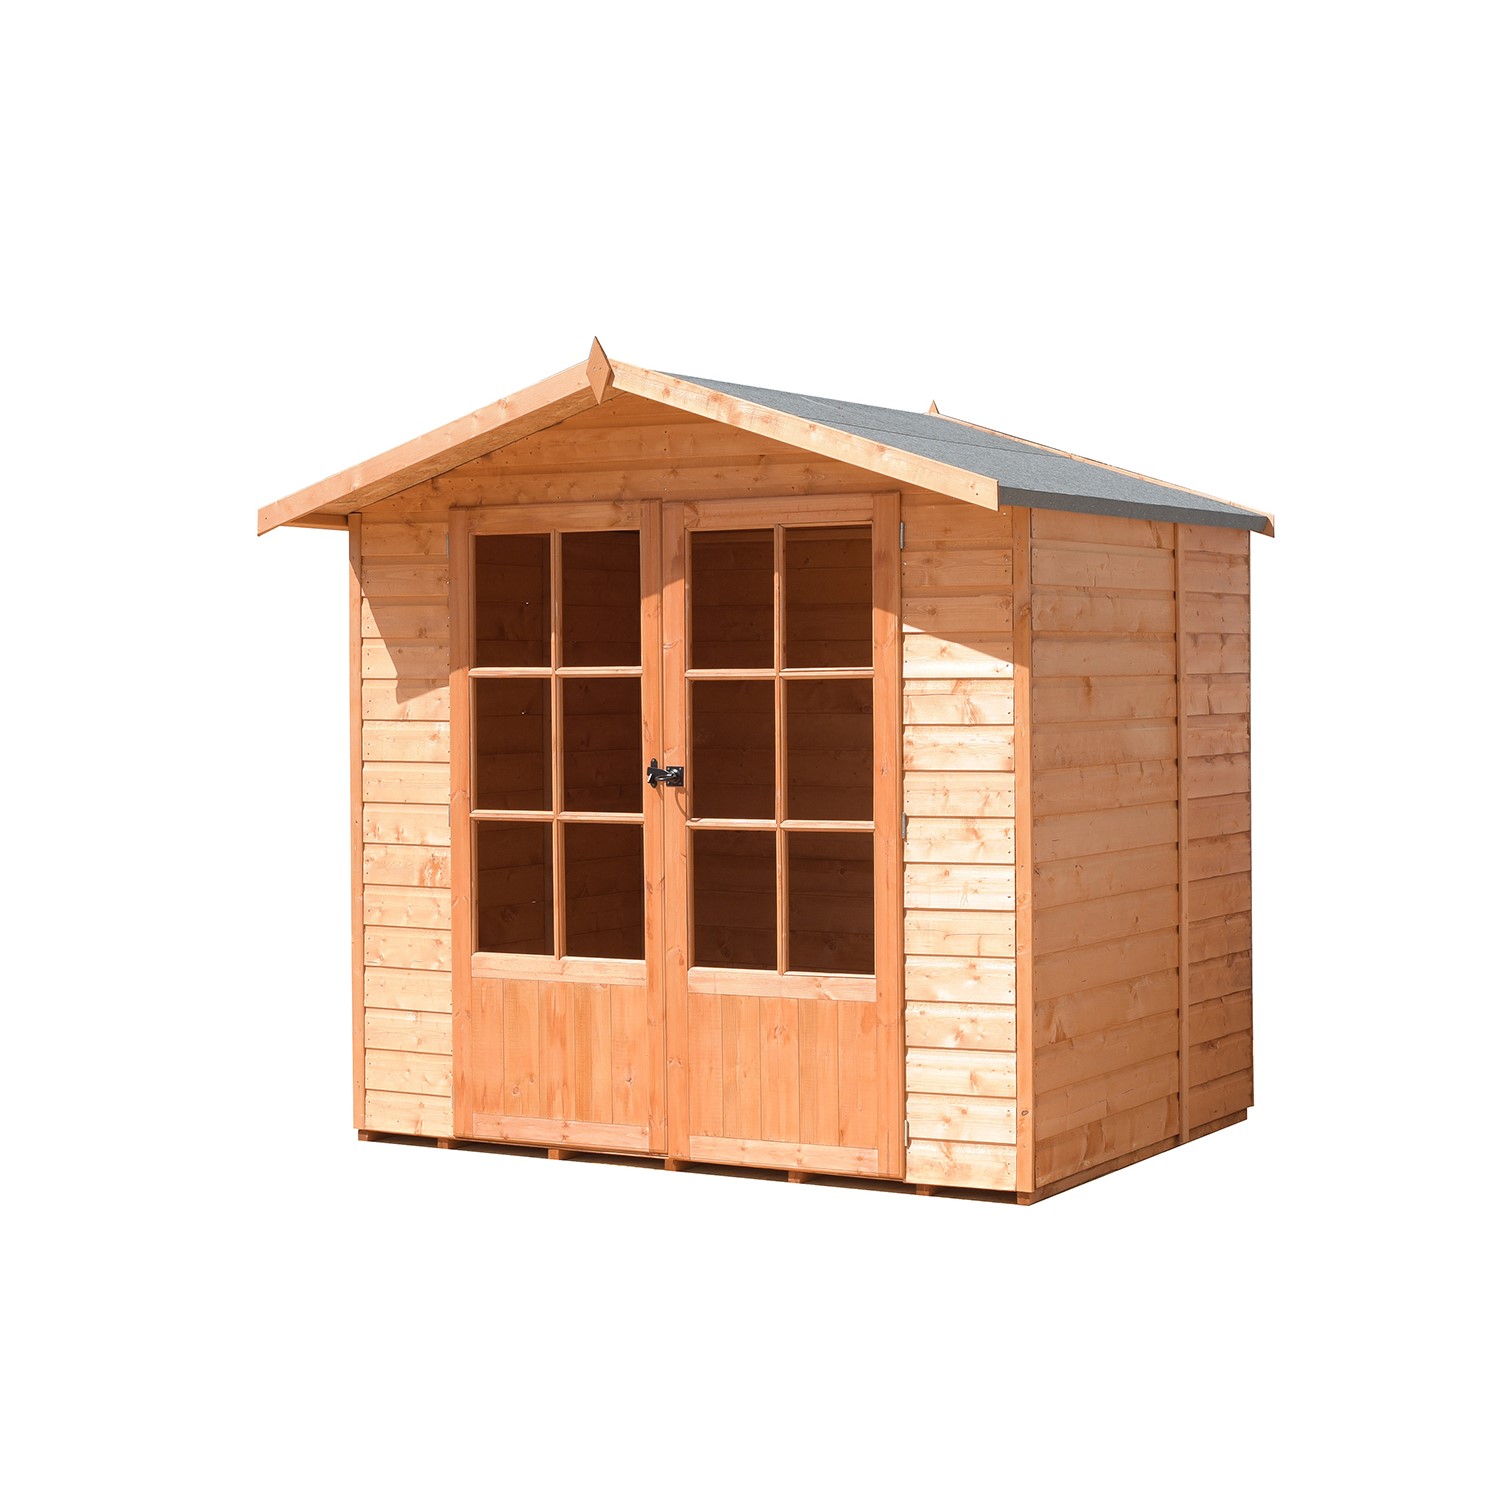 Read more about Shire lumley wooden garden summerhouse 6 x 6ft